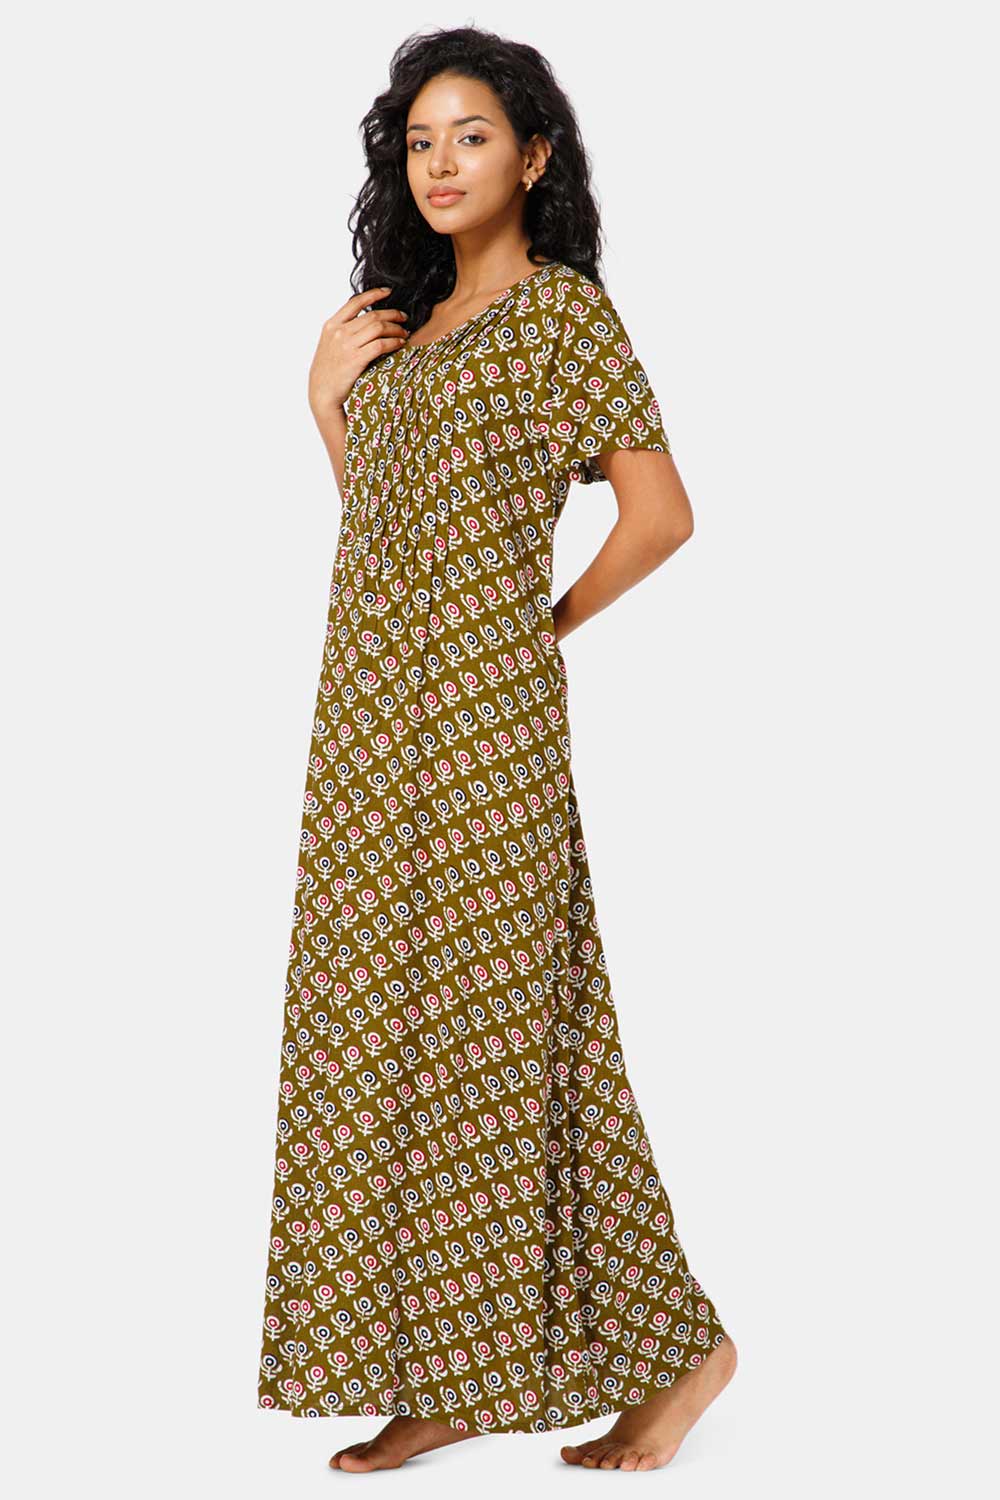 Naidu Hall Front Open V Neck Short Sleeve Printed Nighty-Olive - NT51